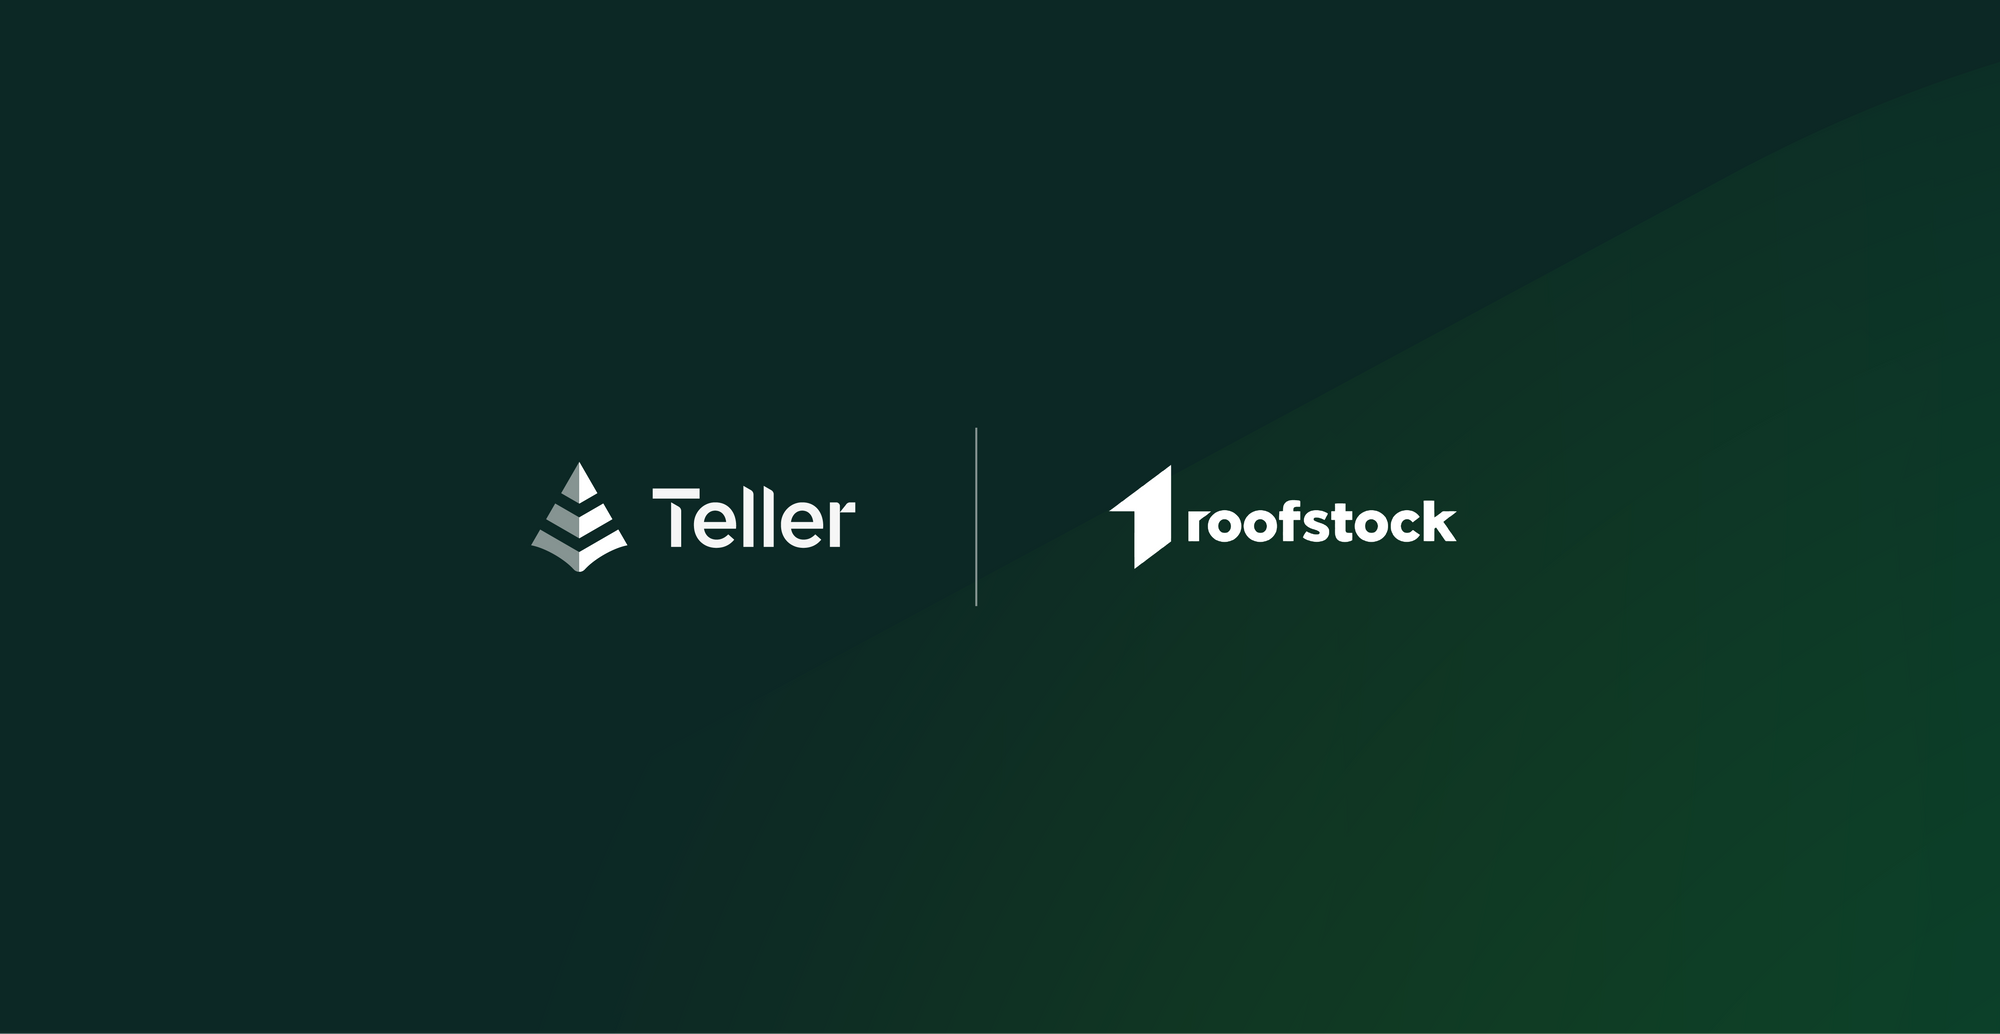 Logo of Teller and Roofstock together showing their partnership